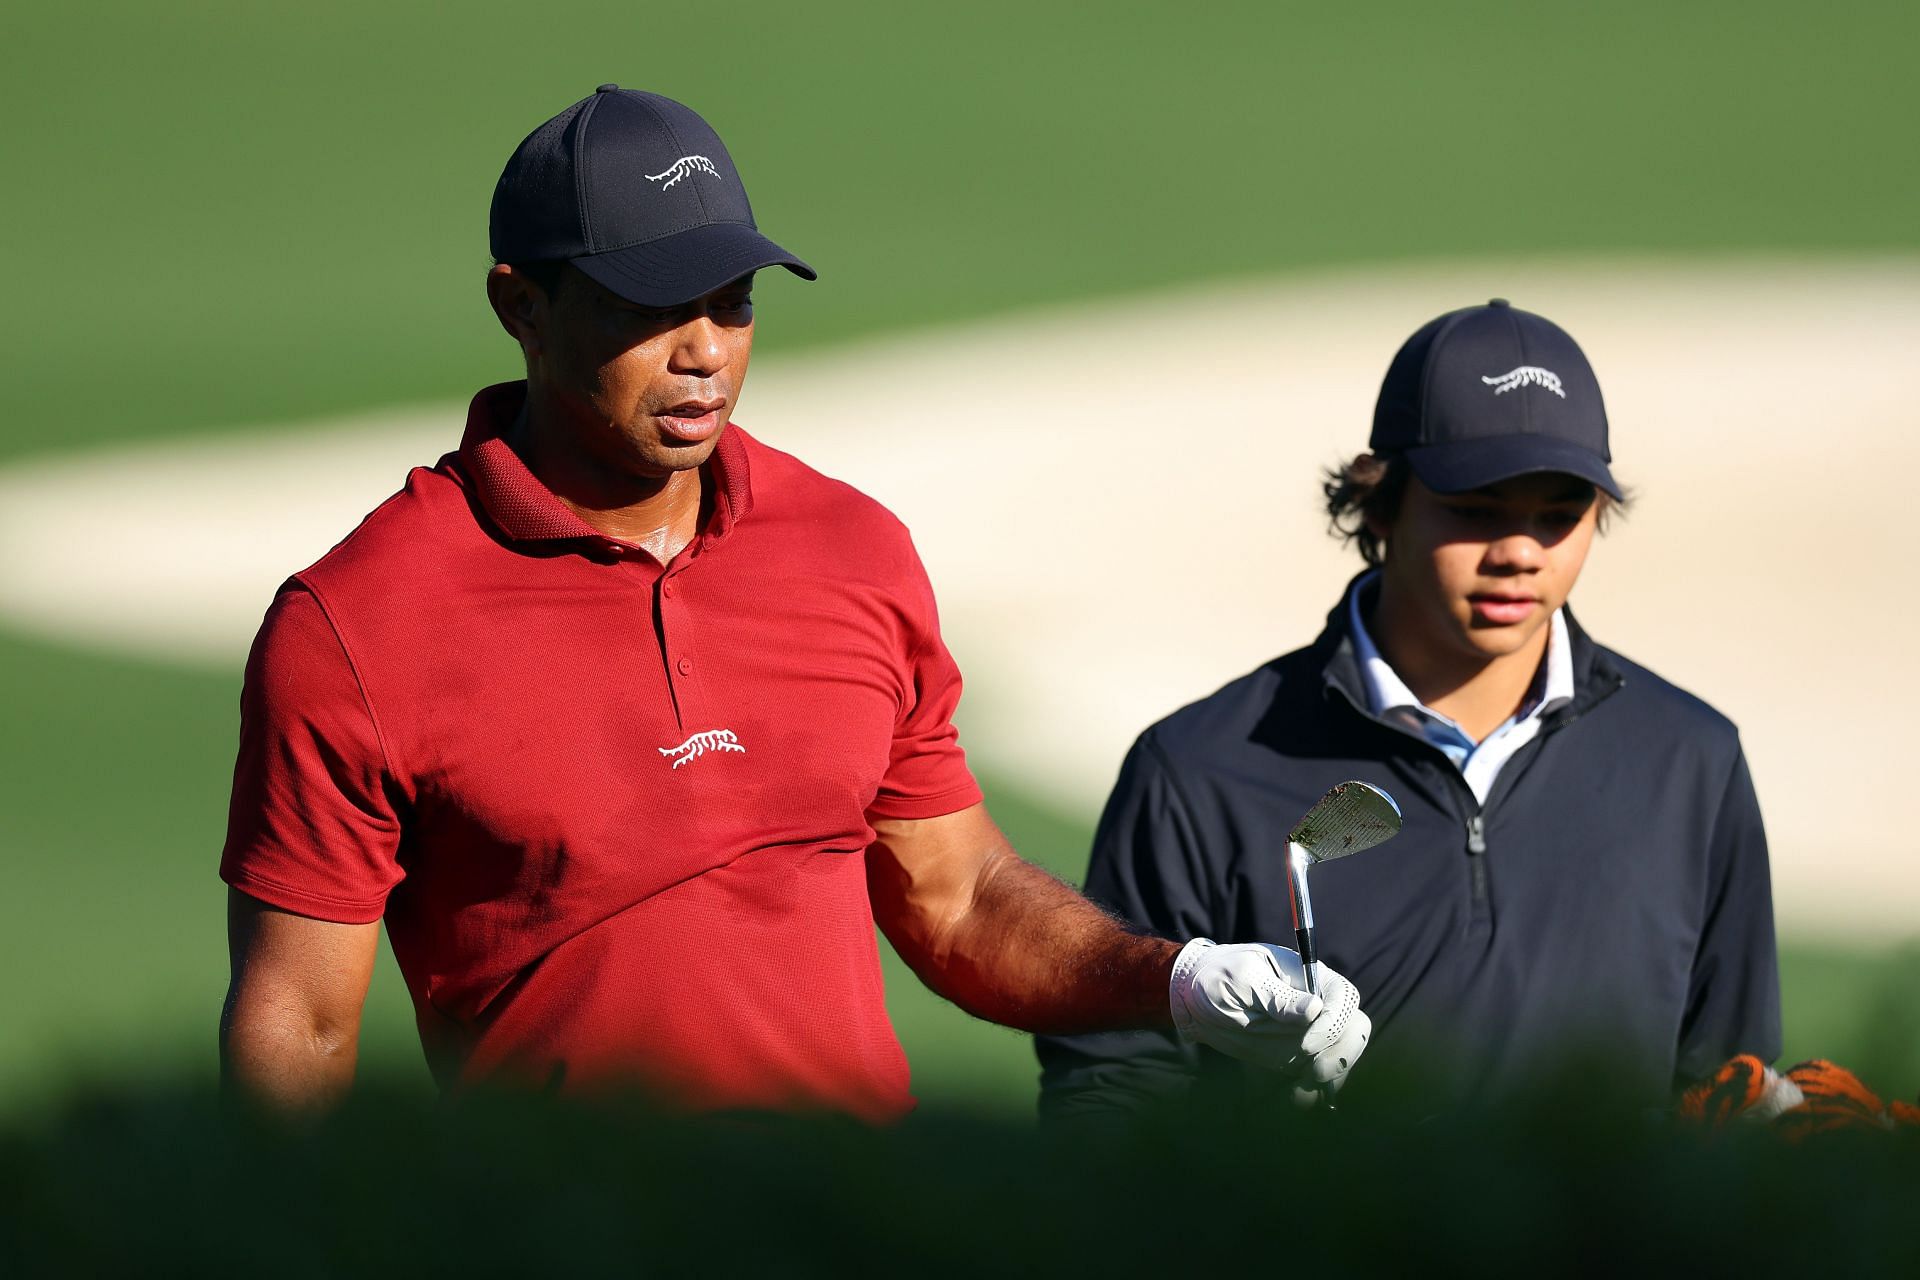 Tiger Woods and Charlie Woods at The Masters - Final Round (Source: Getty Images)